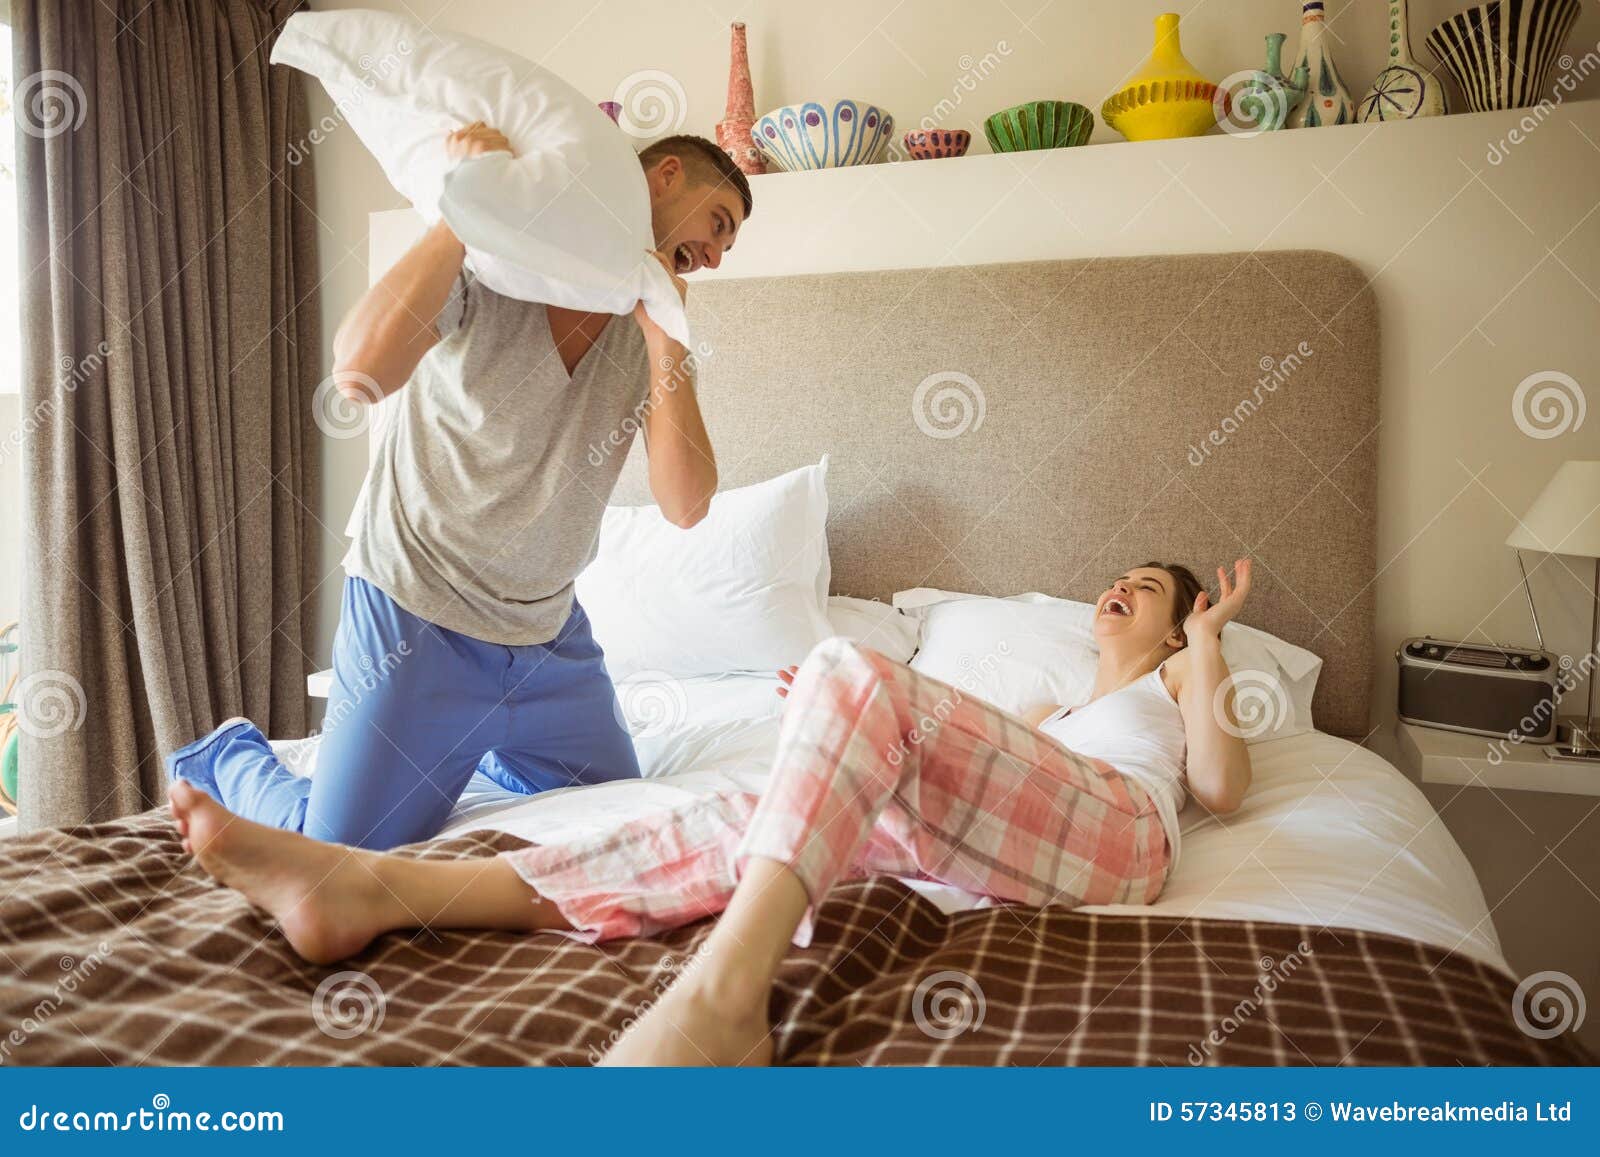 Cute Couple Having A Pillow Fight Stock Image Image Of Domicile Male 57345813